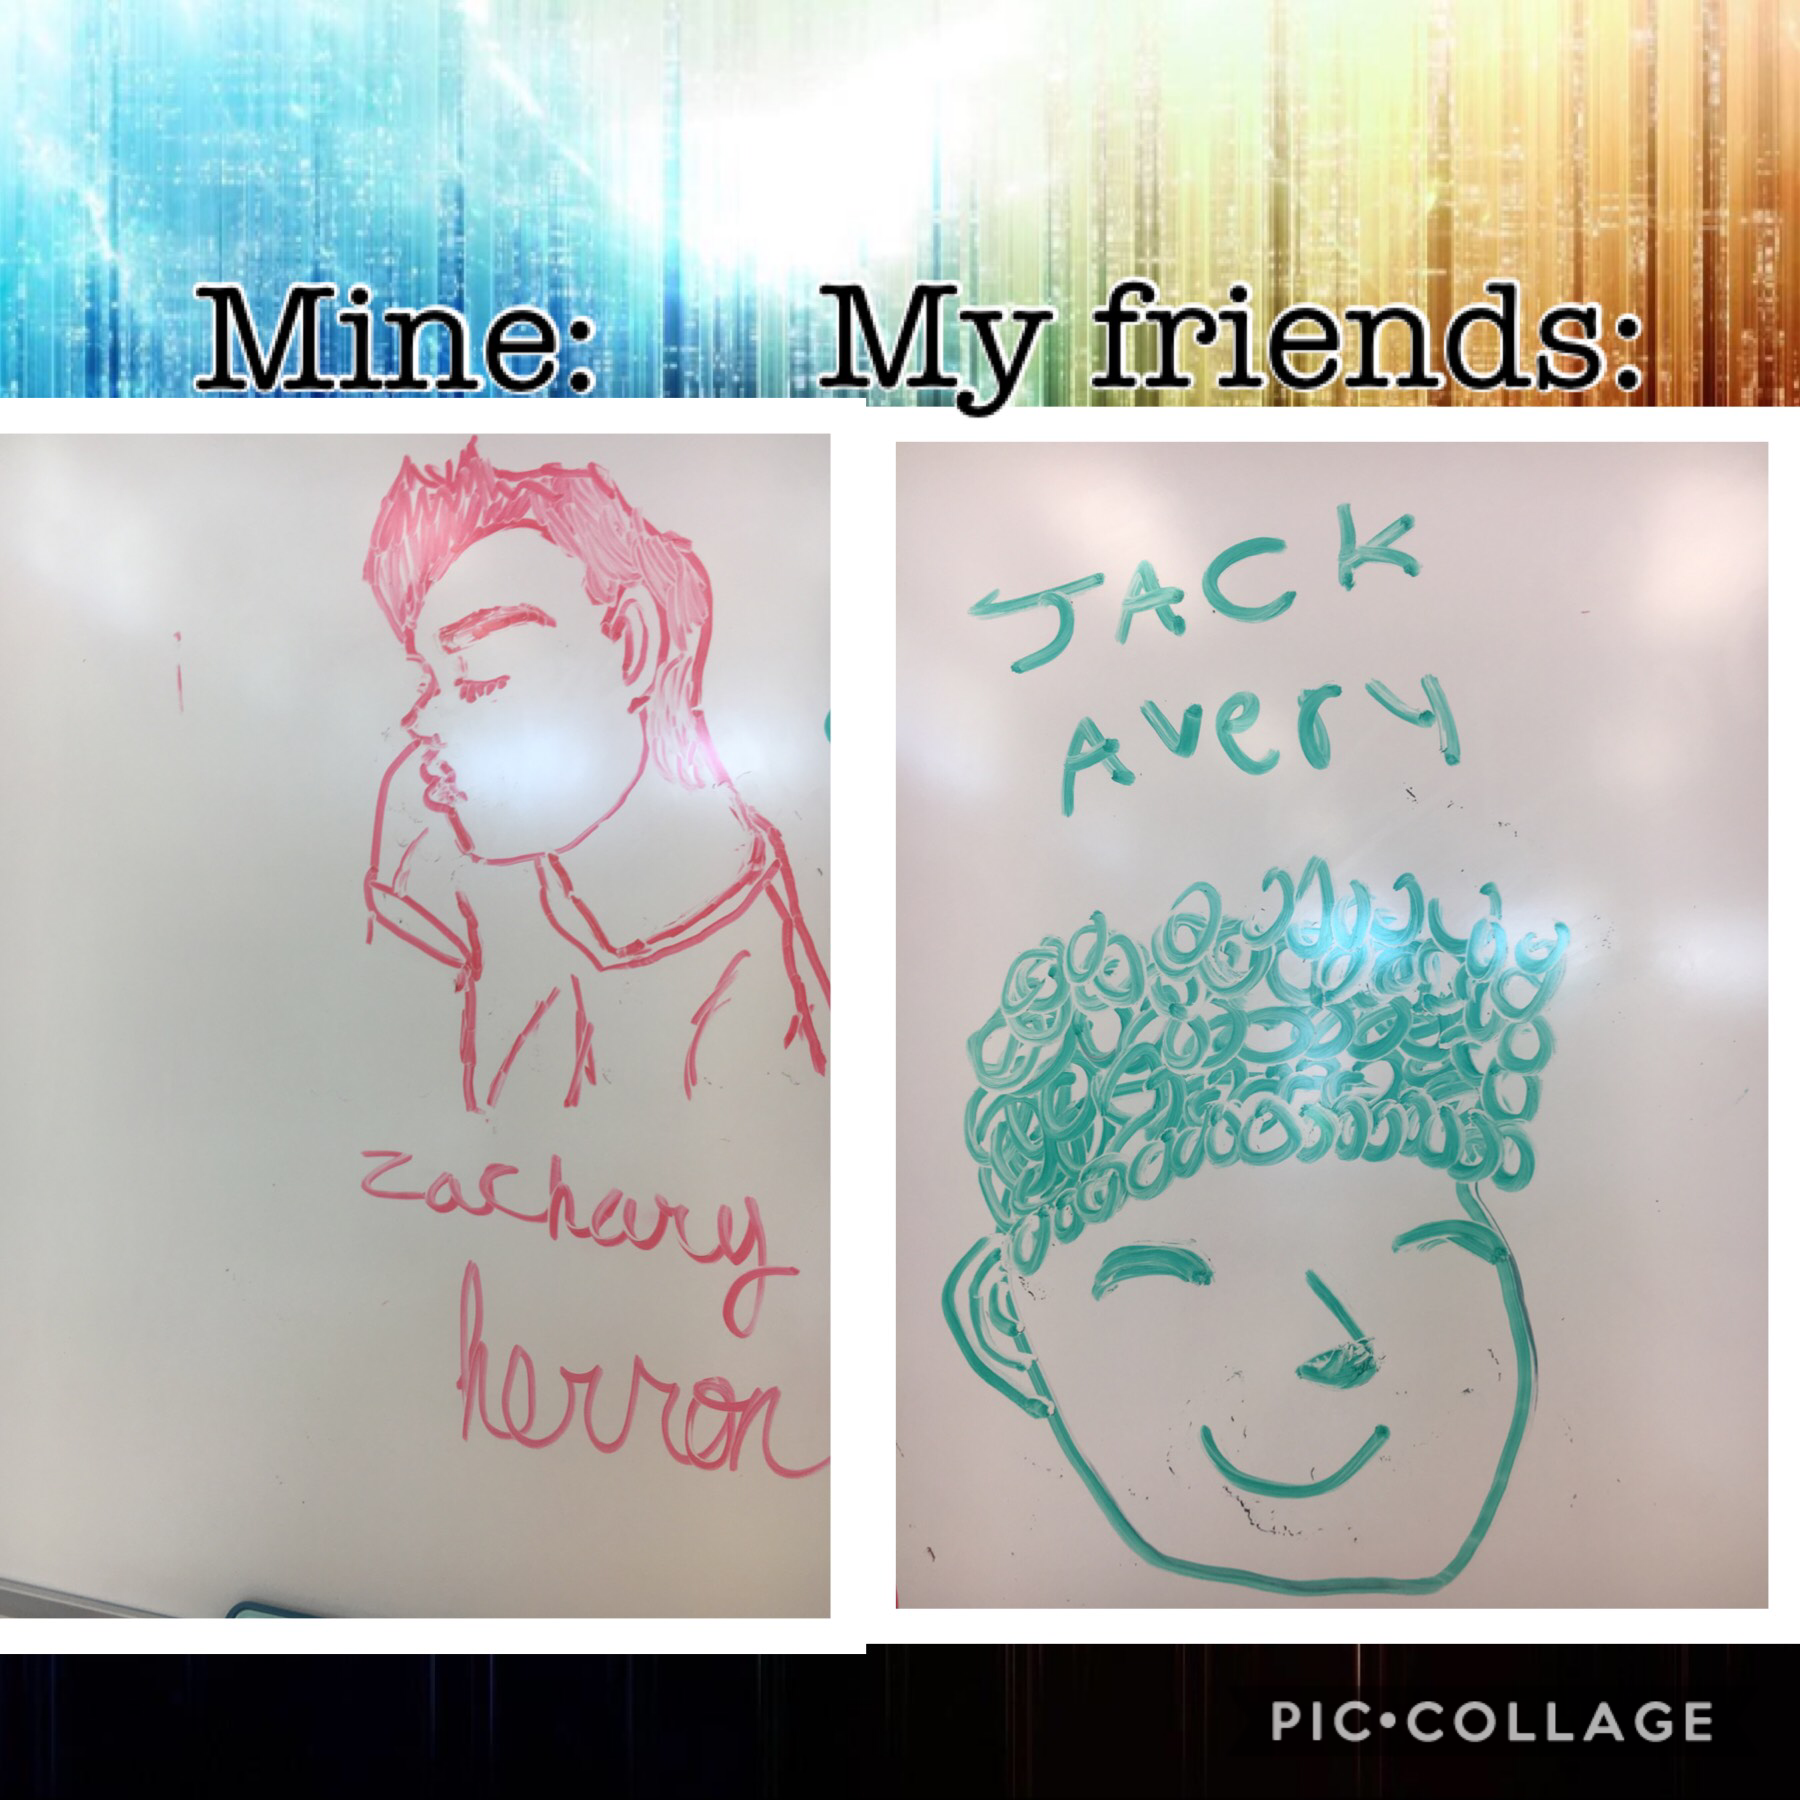 Me and my friend are good artists😂😂